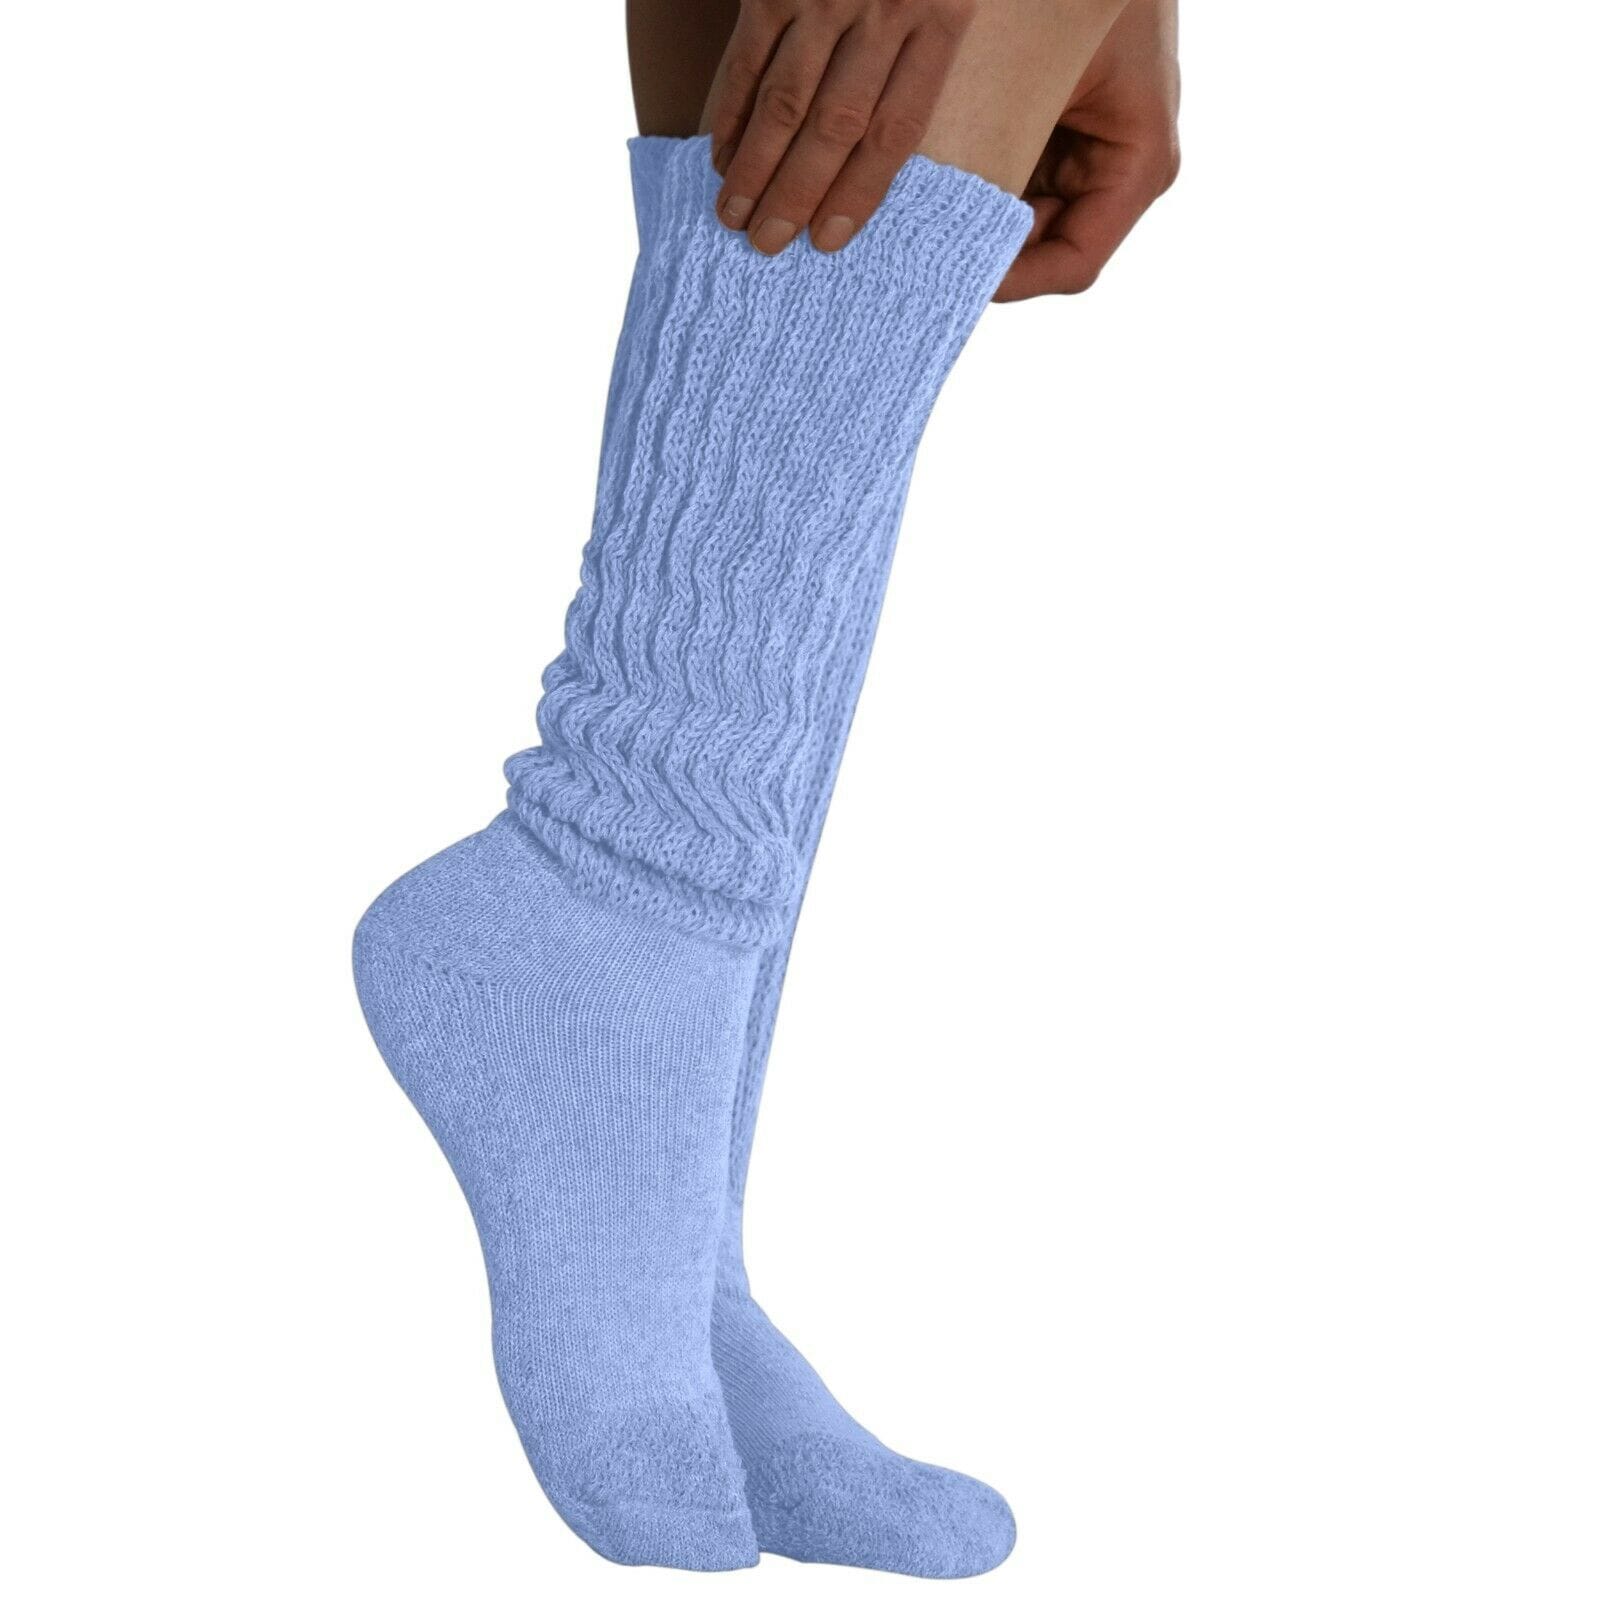 MDR Women's Extra Long Heavy Slouch Cotton Socks Made in USA 1 Pair Size 9 to... - Mdrdistributors